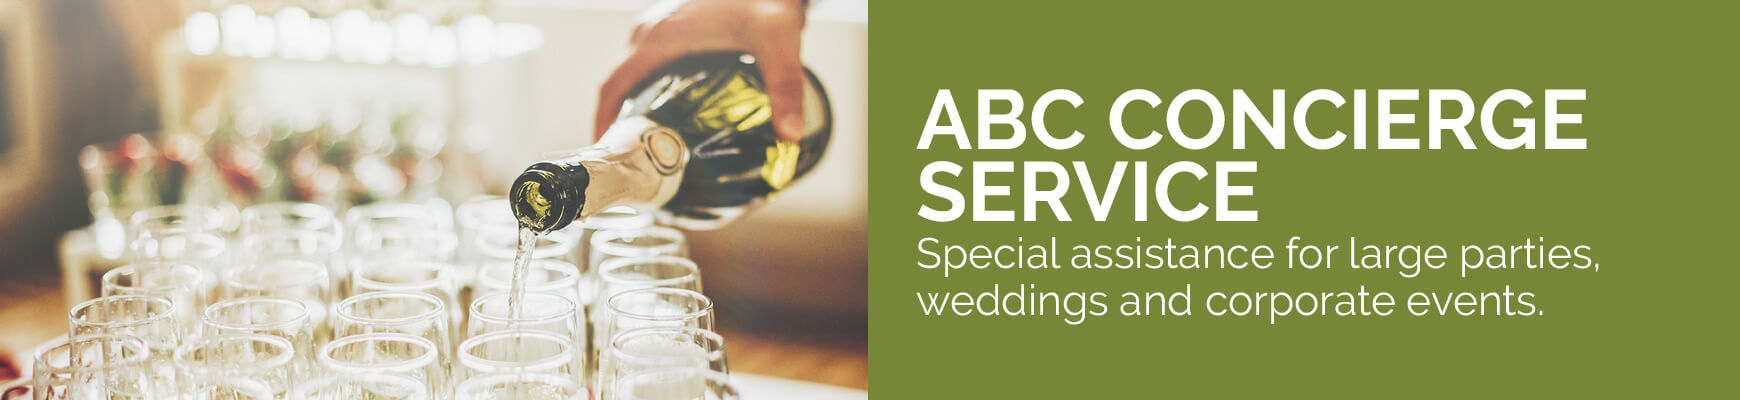 ABC Concierge Service. Special assistance for large parties, weddings and corporate events.